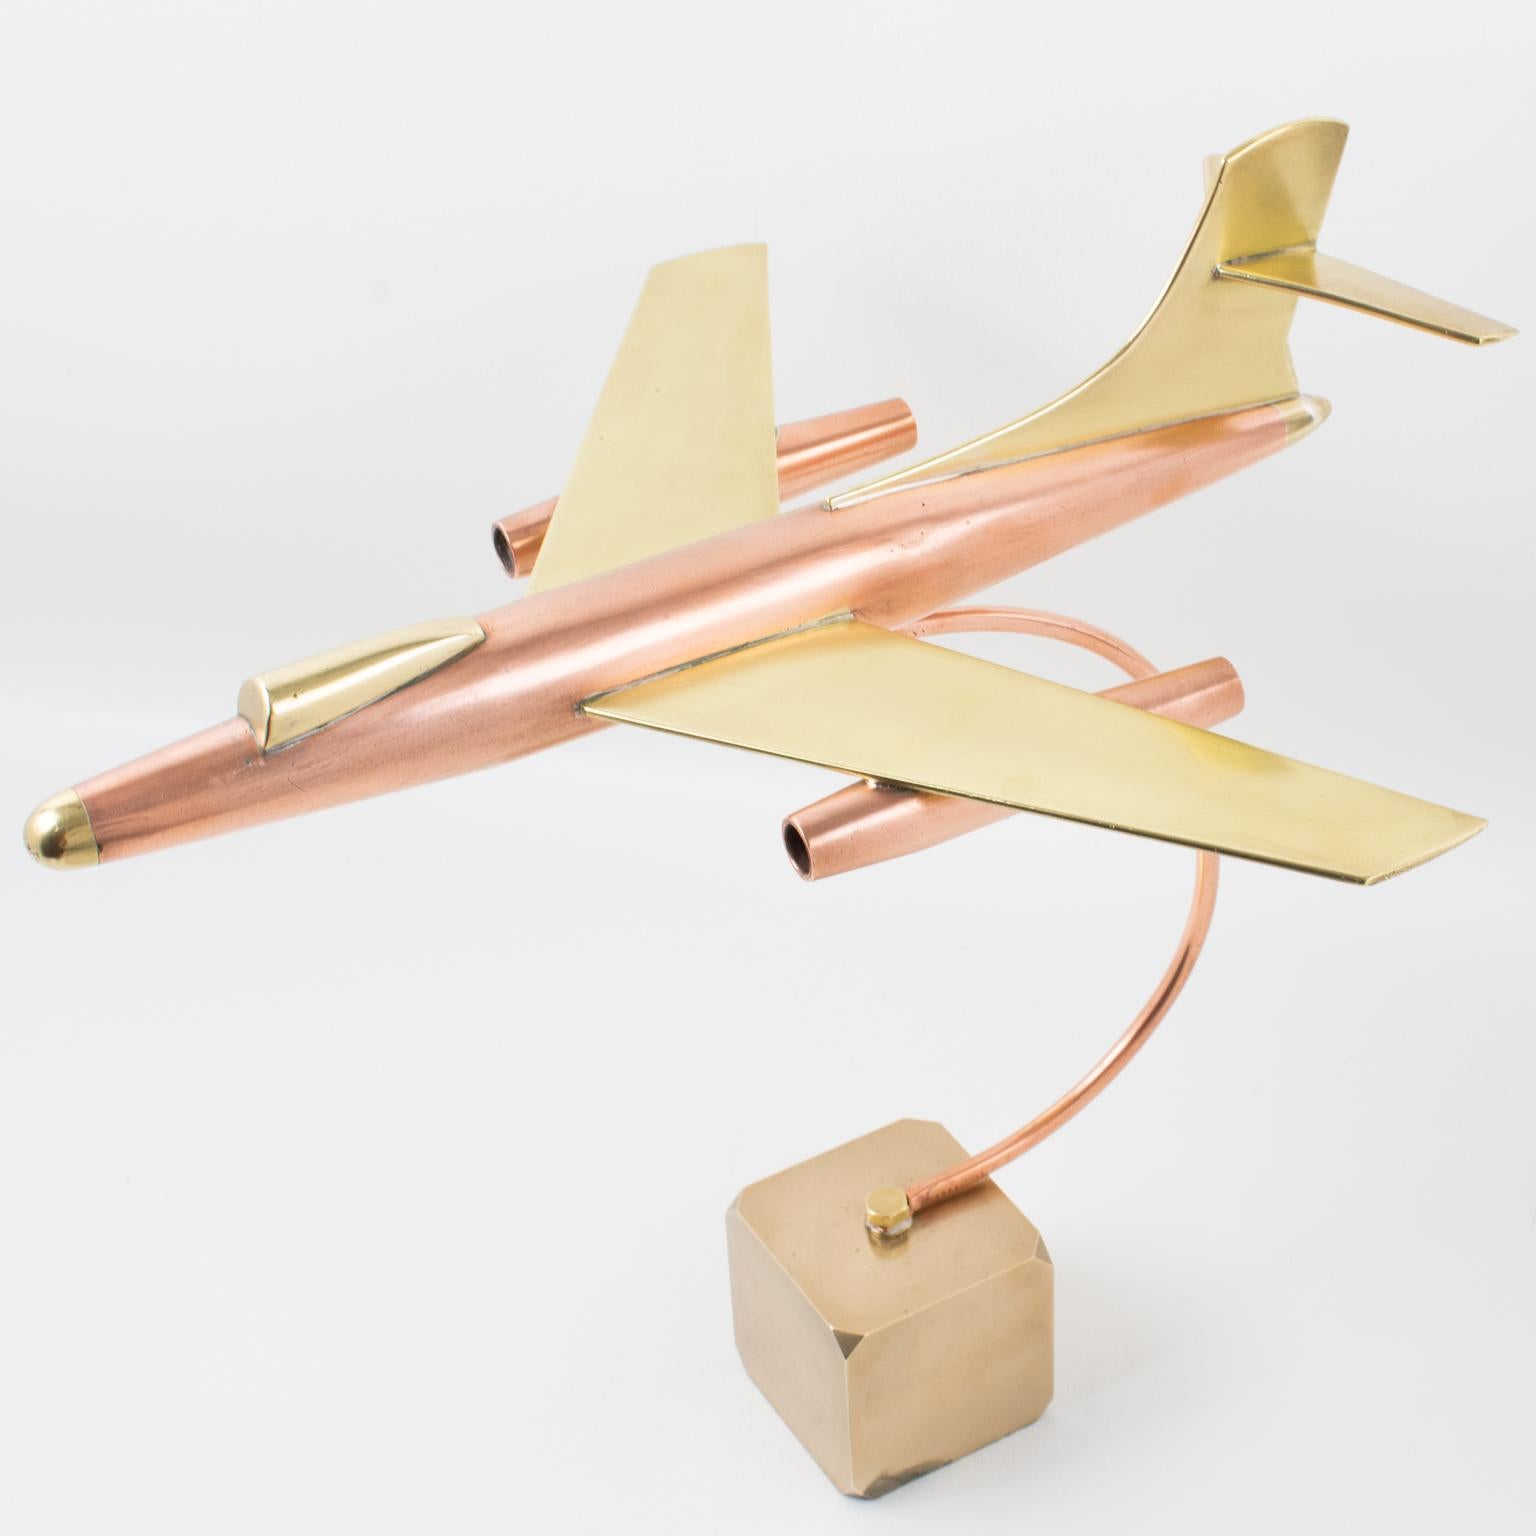 Brass and Copper Airplane Jet Aviation Model, France 1960s For Sale 8